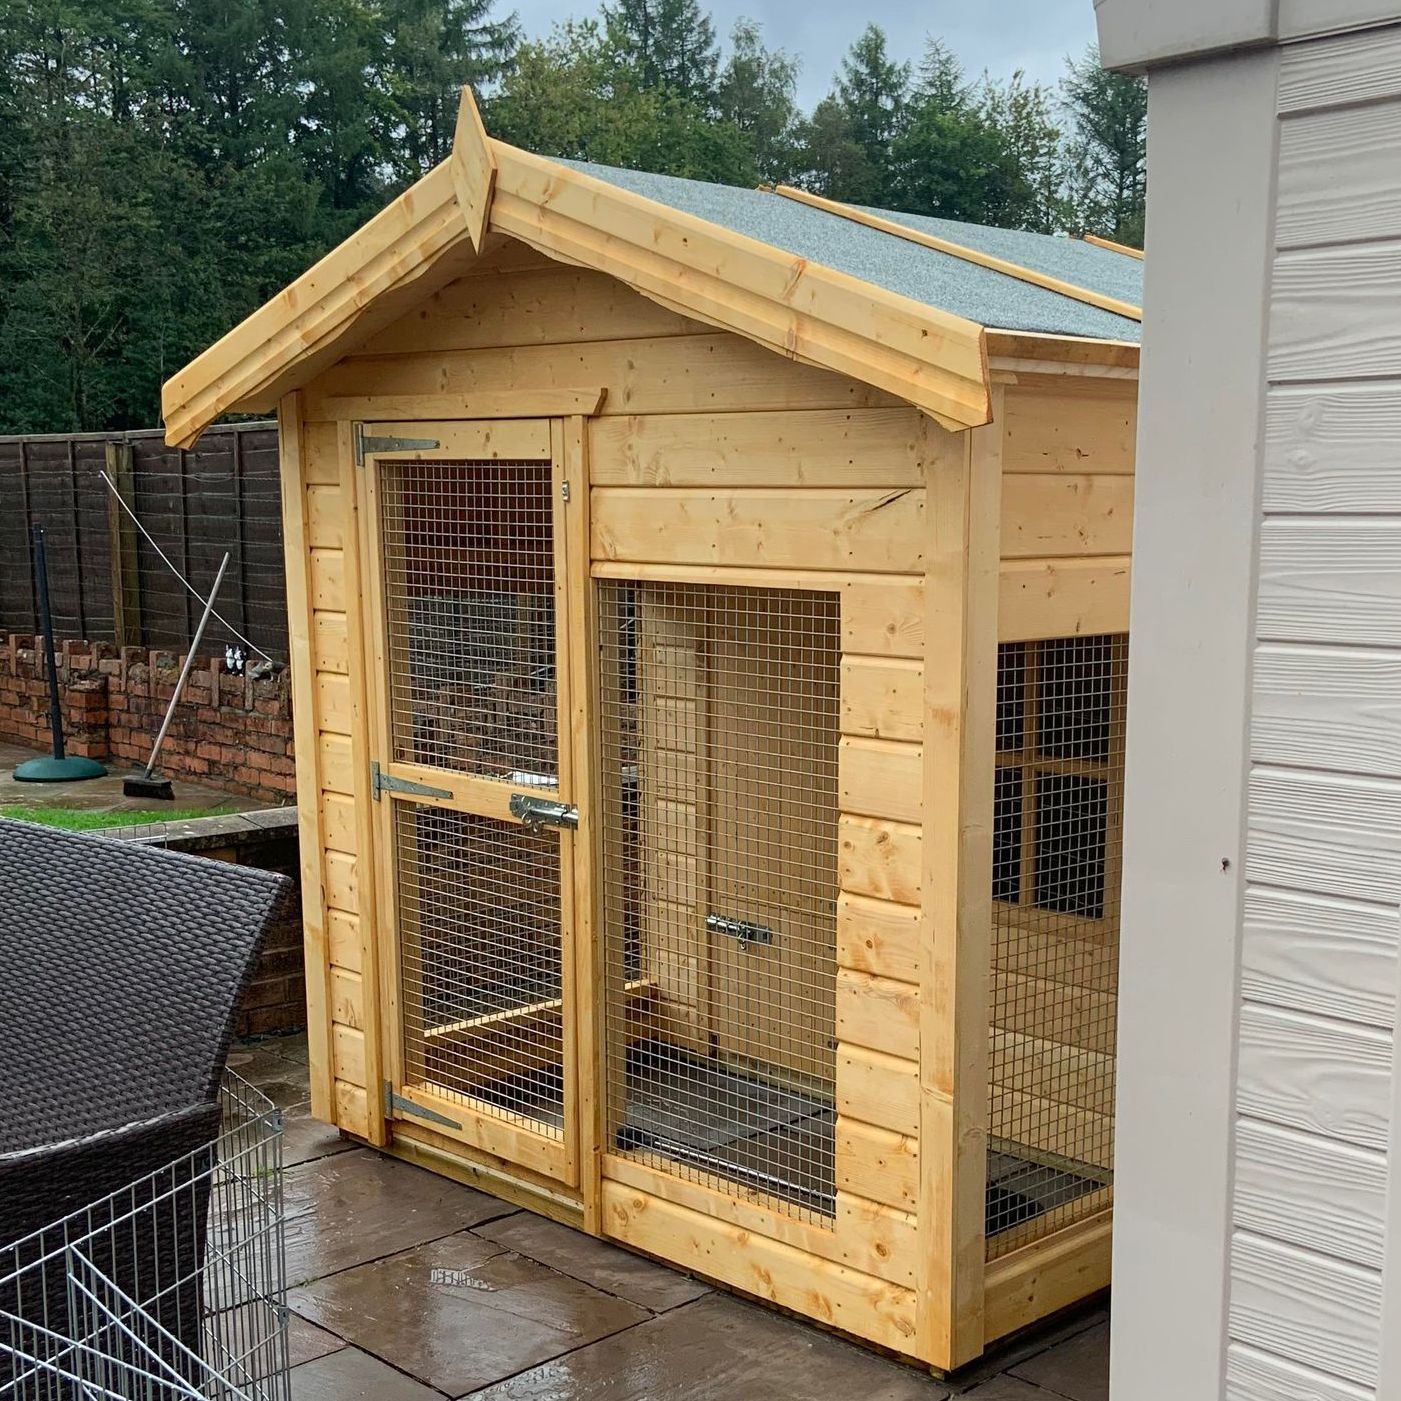 7' x 6' Made to measure rabbit house. higher than average walls. A run and pretty window to check in on them during the cold weather.